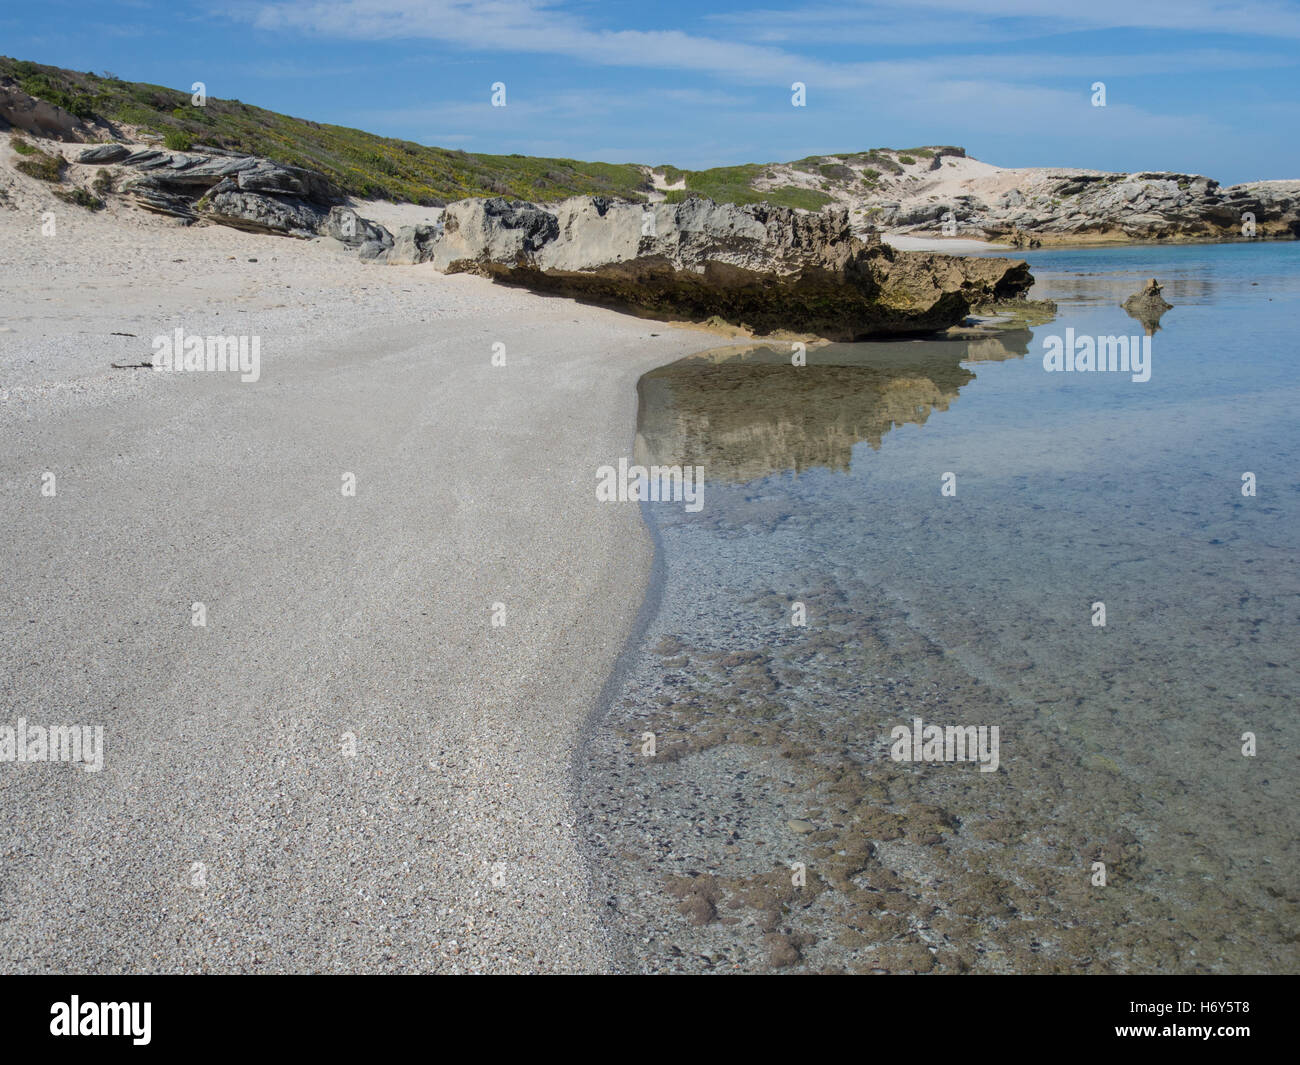 Crystal clear water and white beach at South Africa's coast. Taken at De Hoop Nature Reserve. Stock Photo